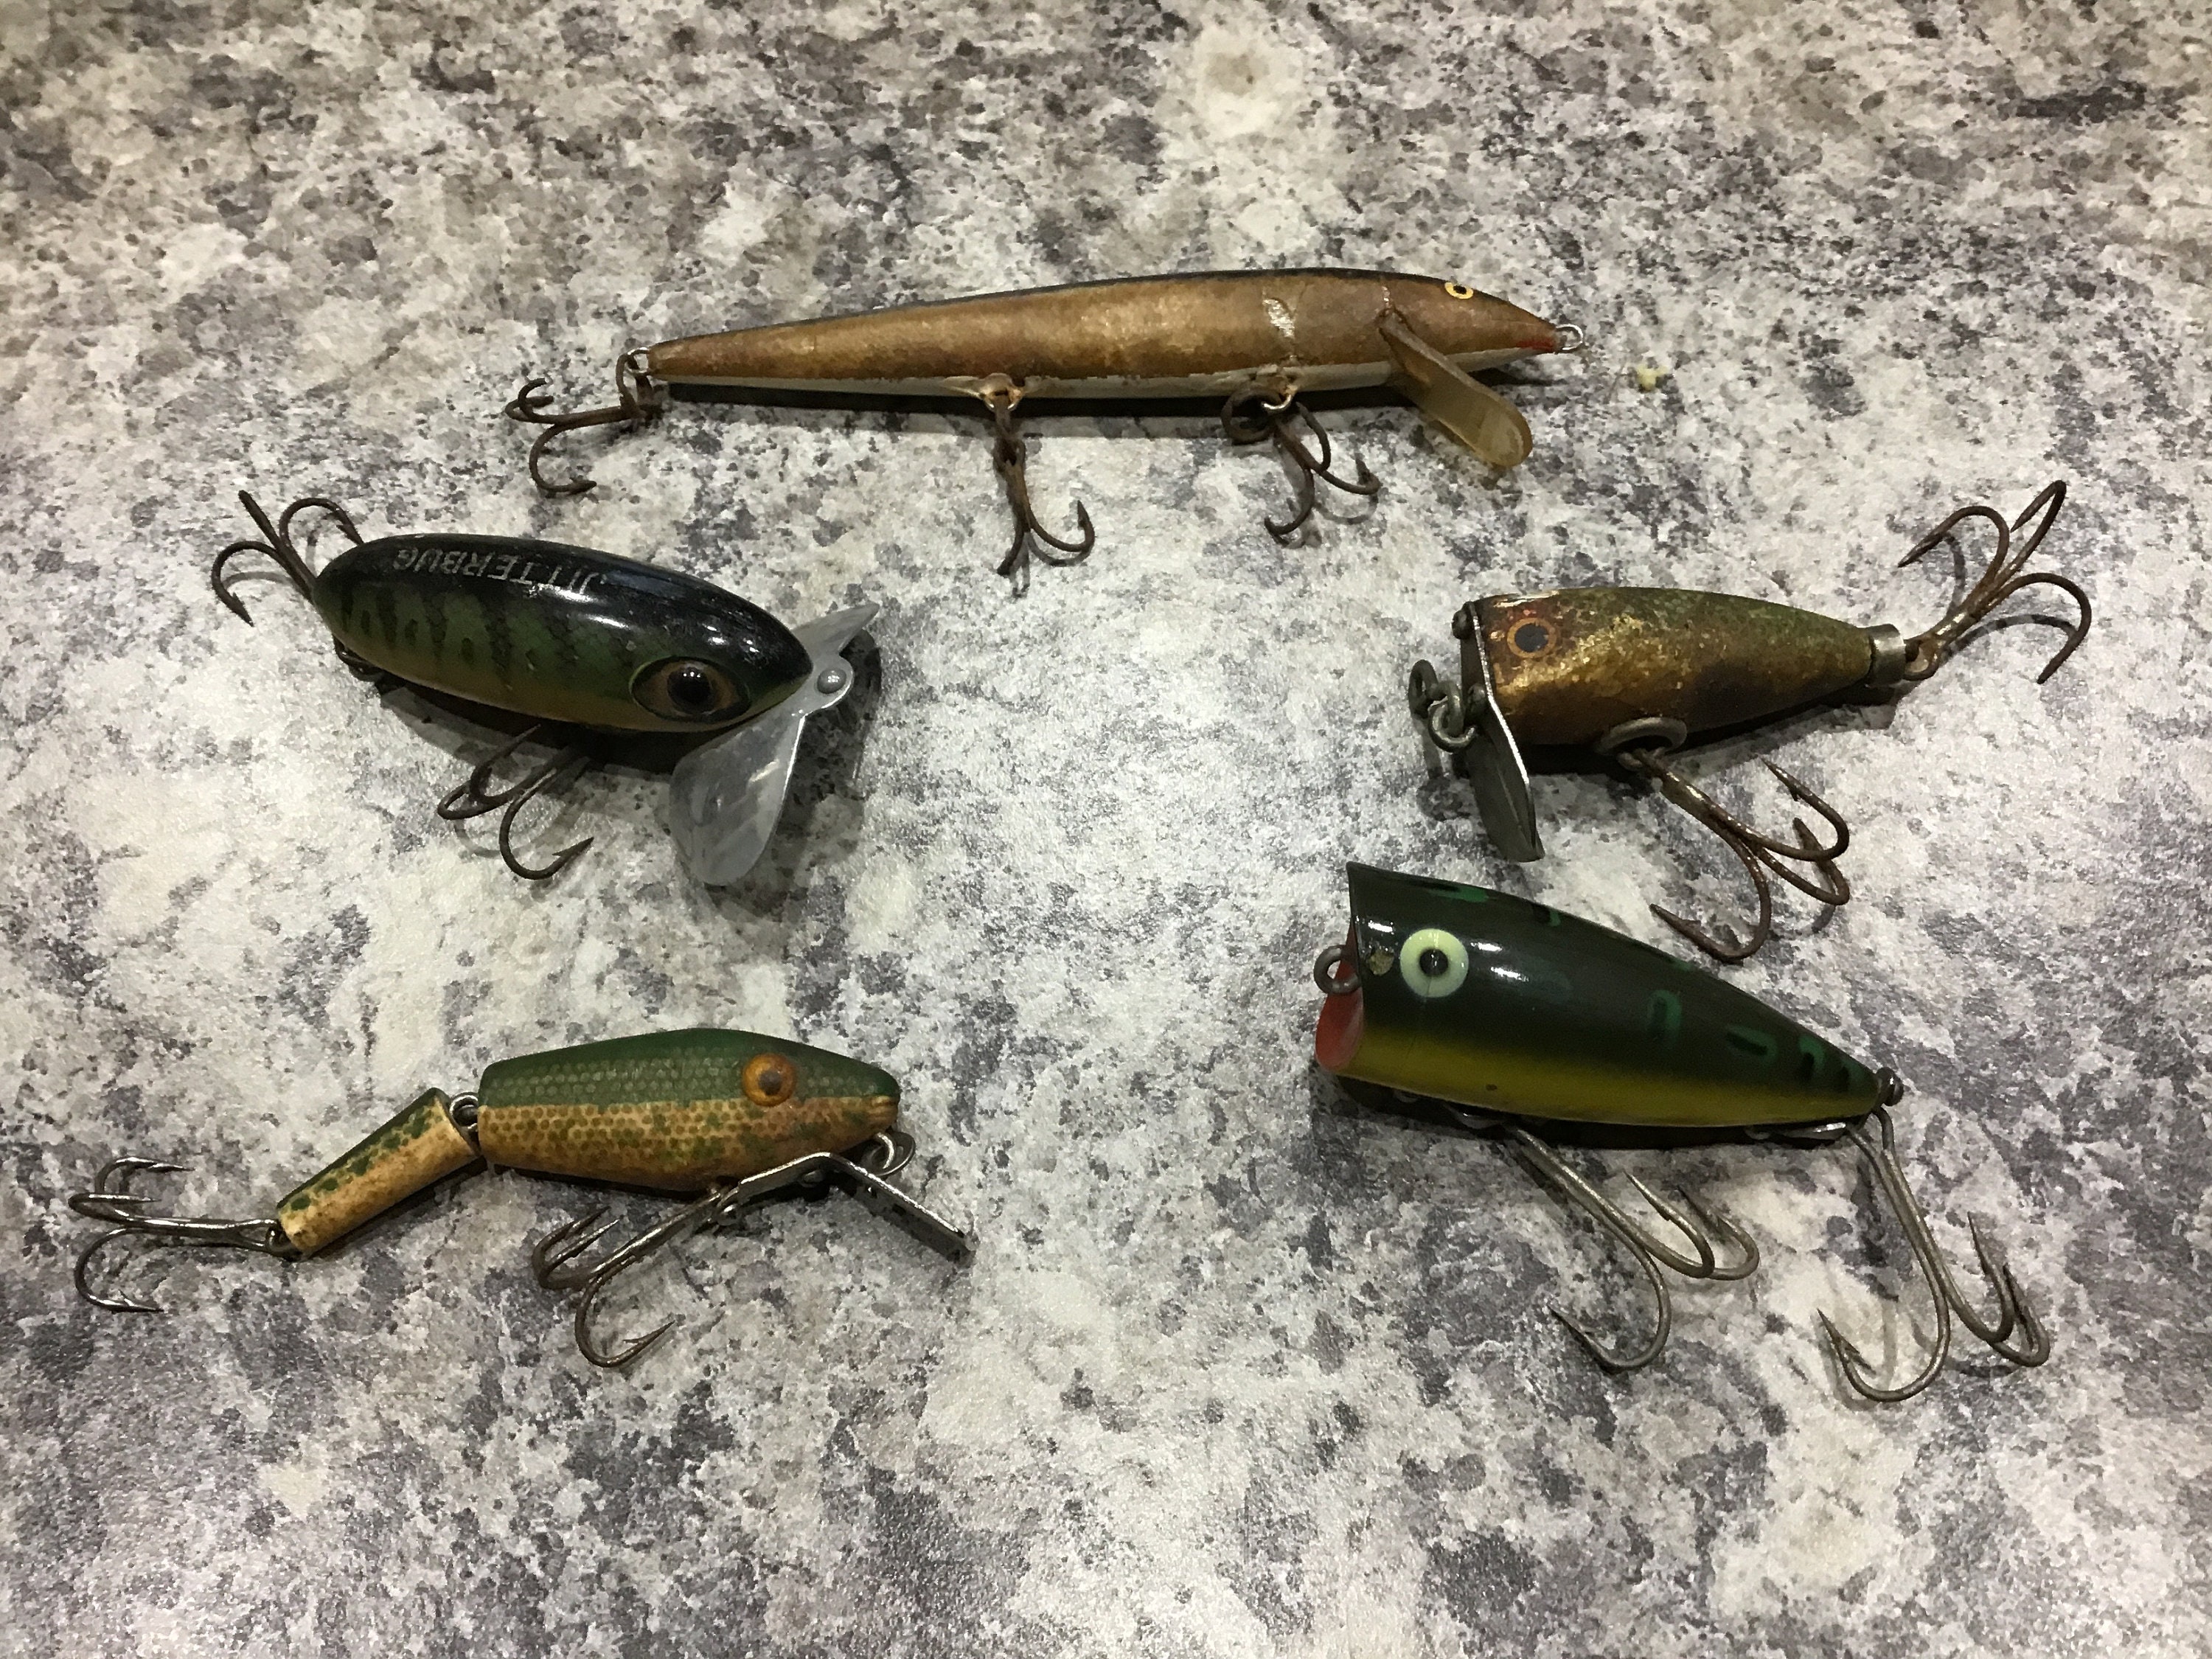 Vintage Fishing Lures, Collection of 5 Lures Vintage Wood Lures